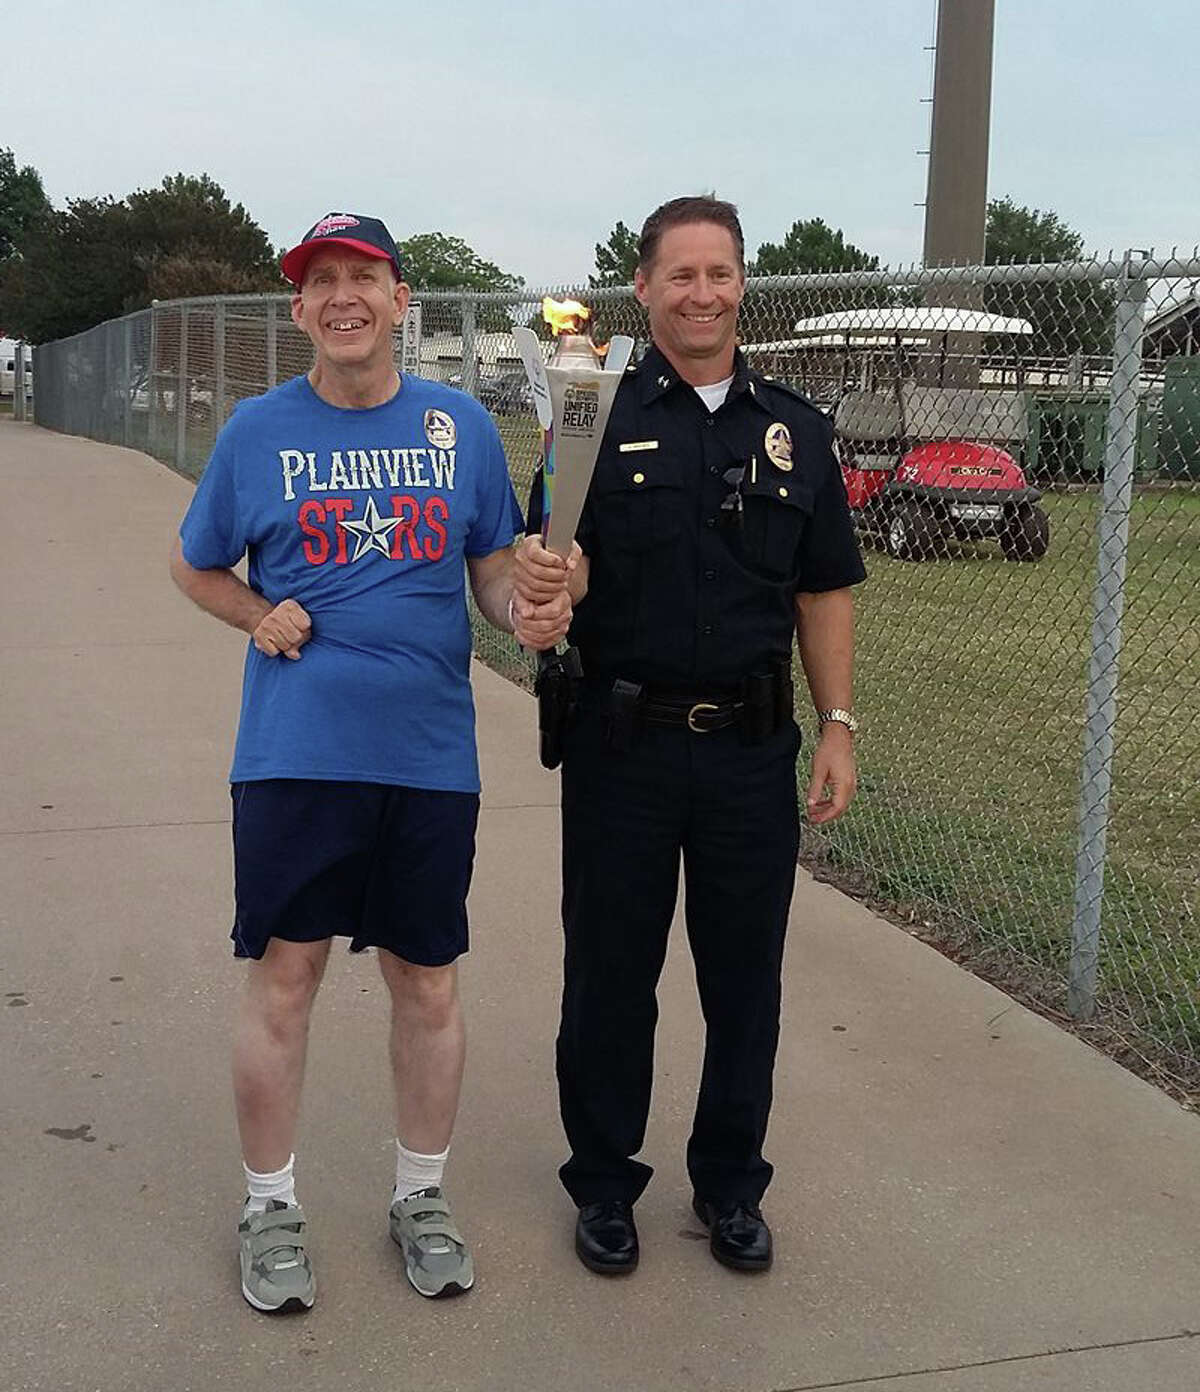 Lynn Mason and Chief Jeff Spivey, Irving Police Department, bringing the Flame of Hope at the State Summer Games.